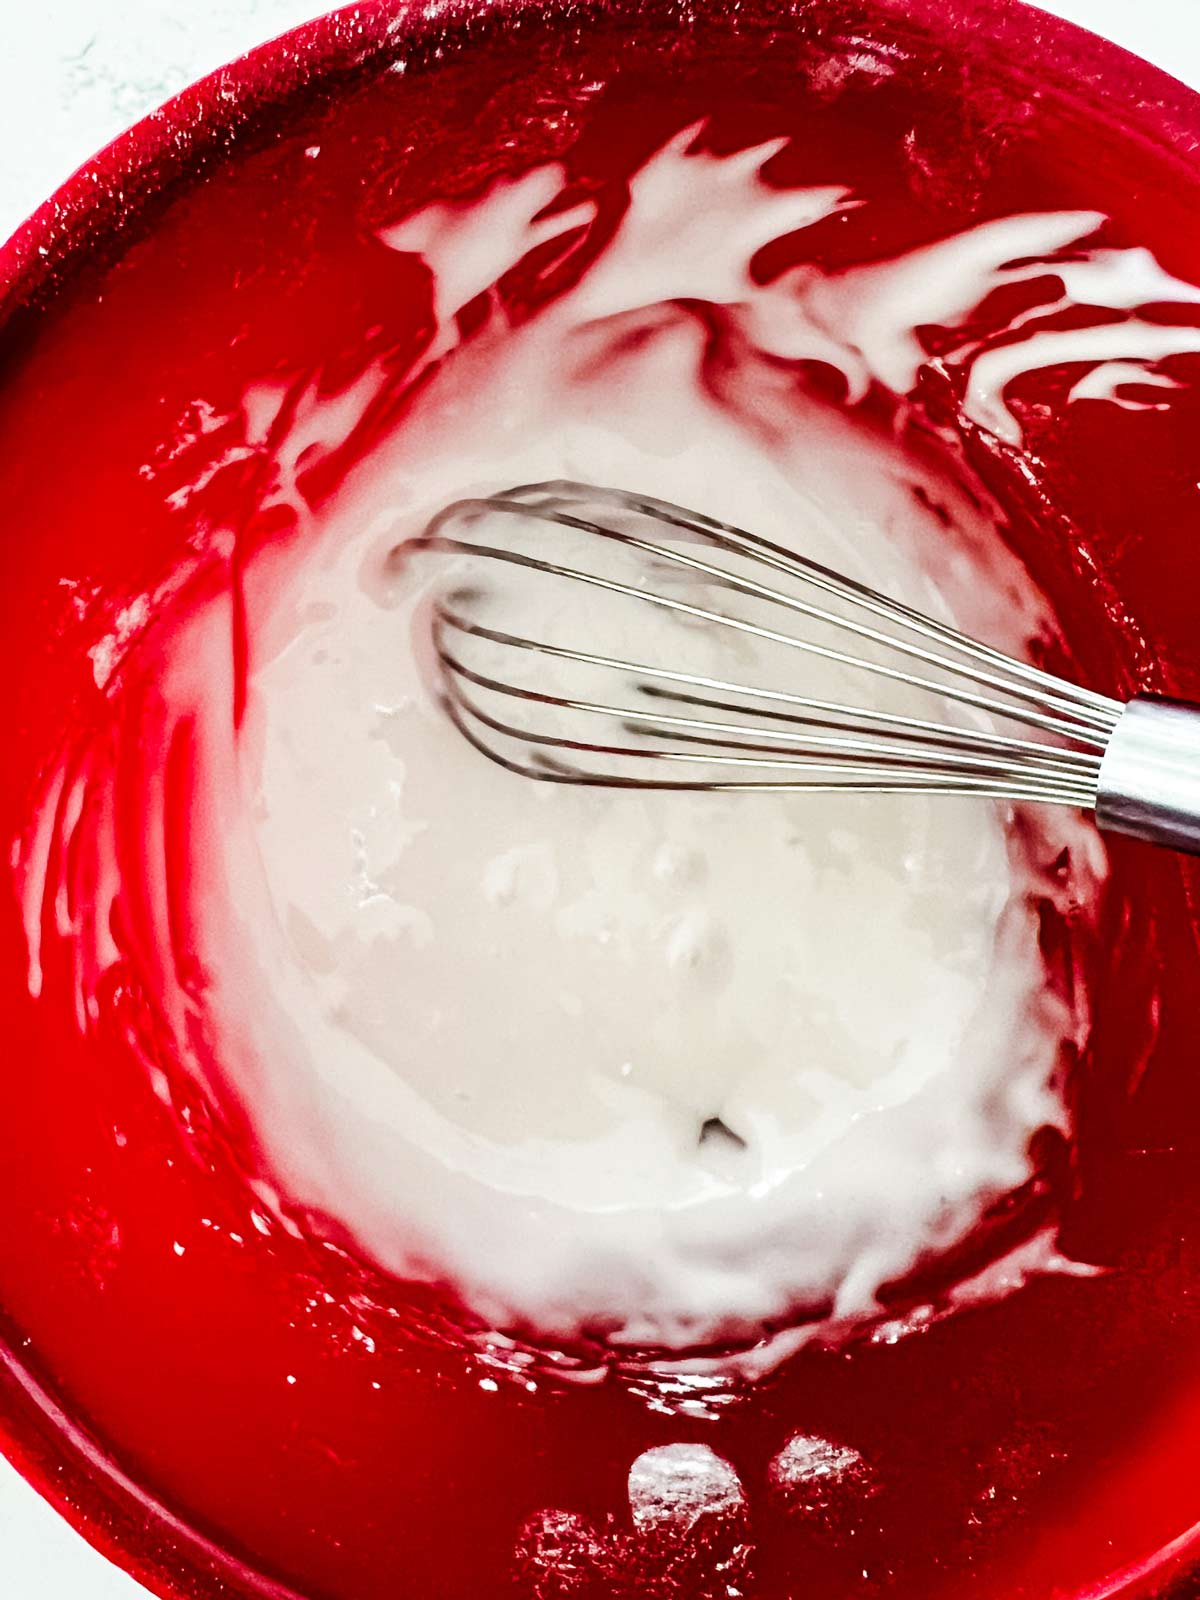 Powdered sugar and lemon juice being blended in a bowl to make a glaze.